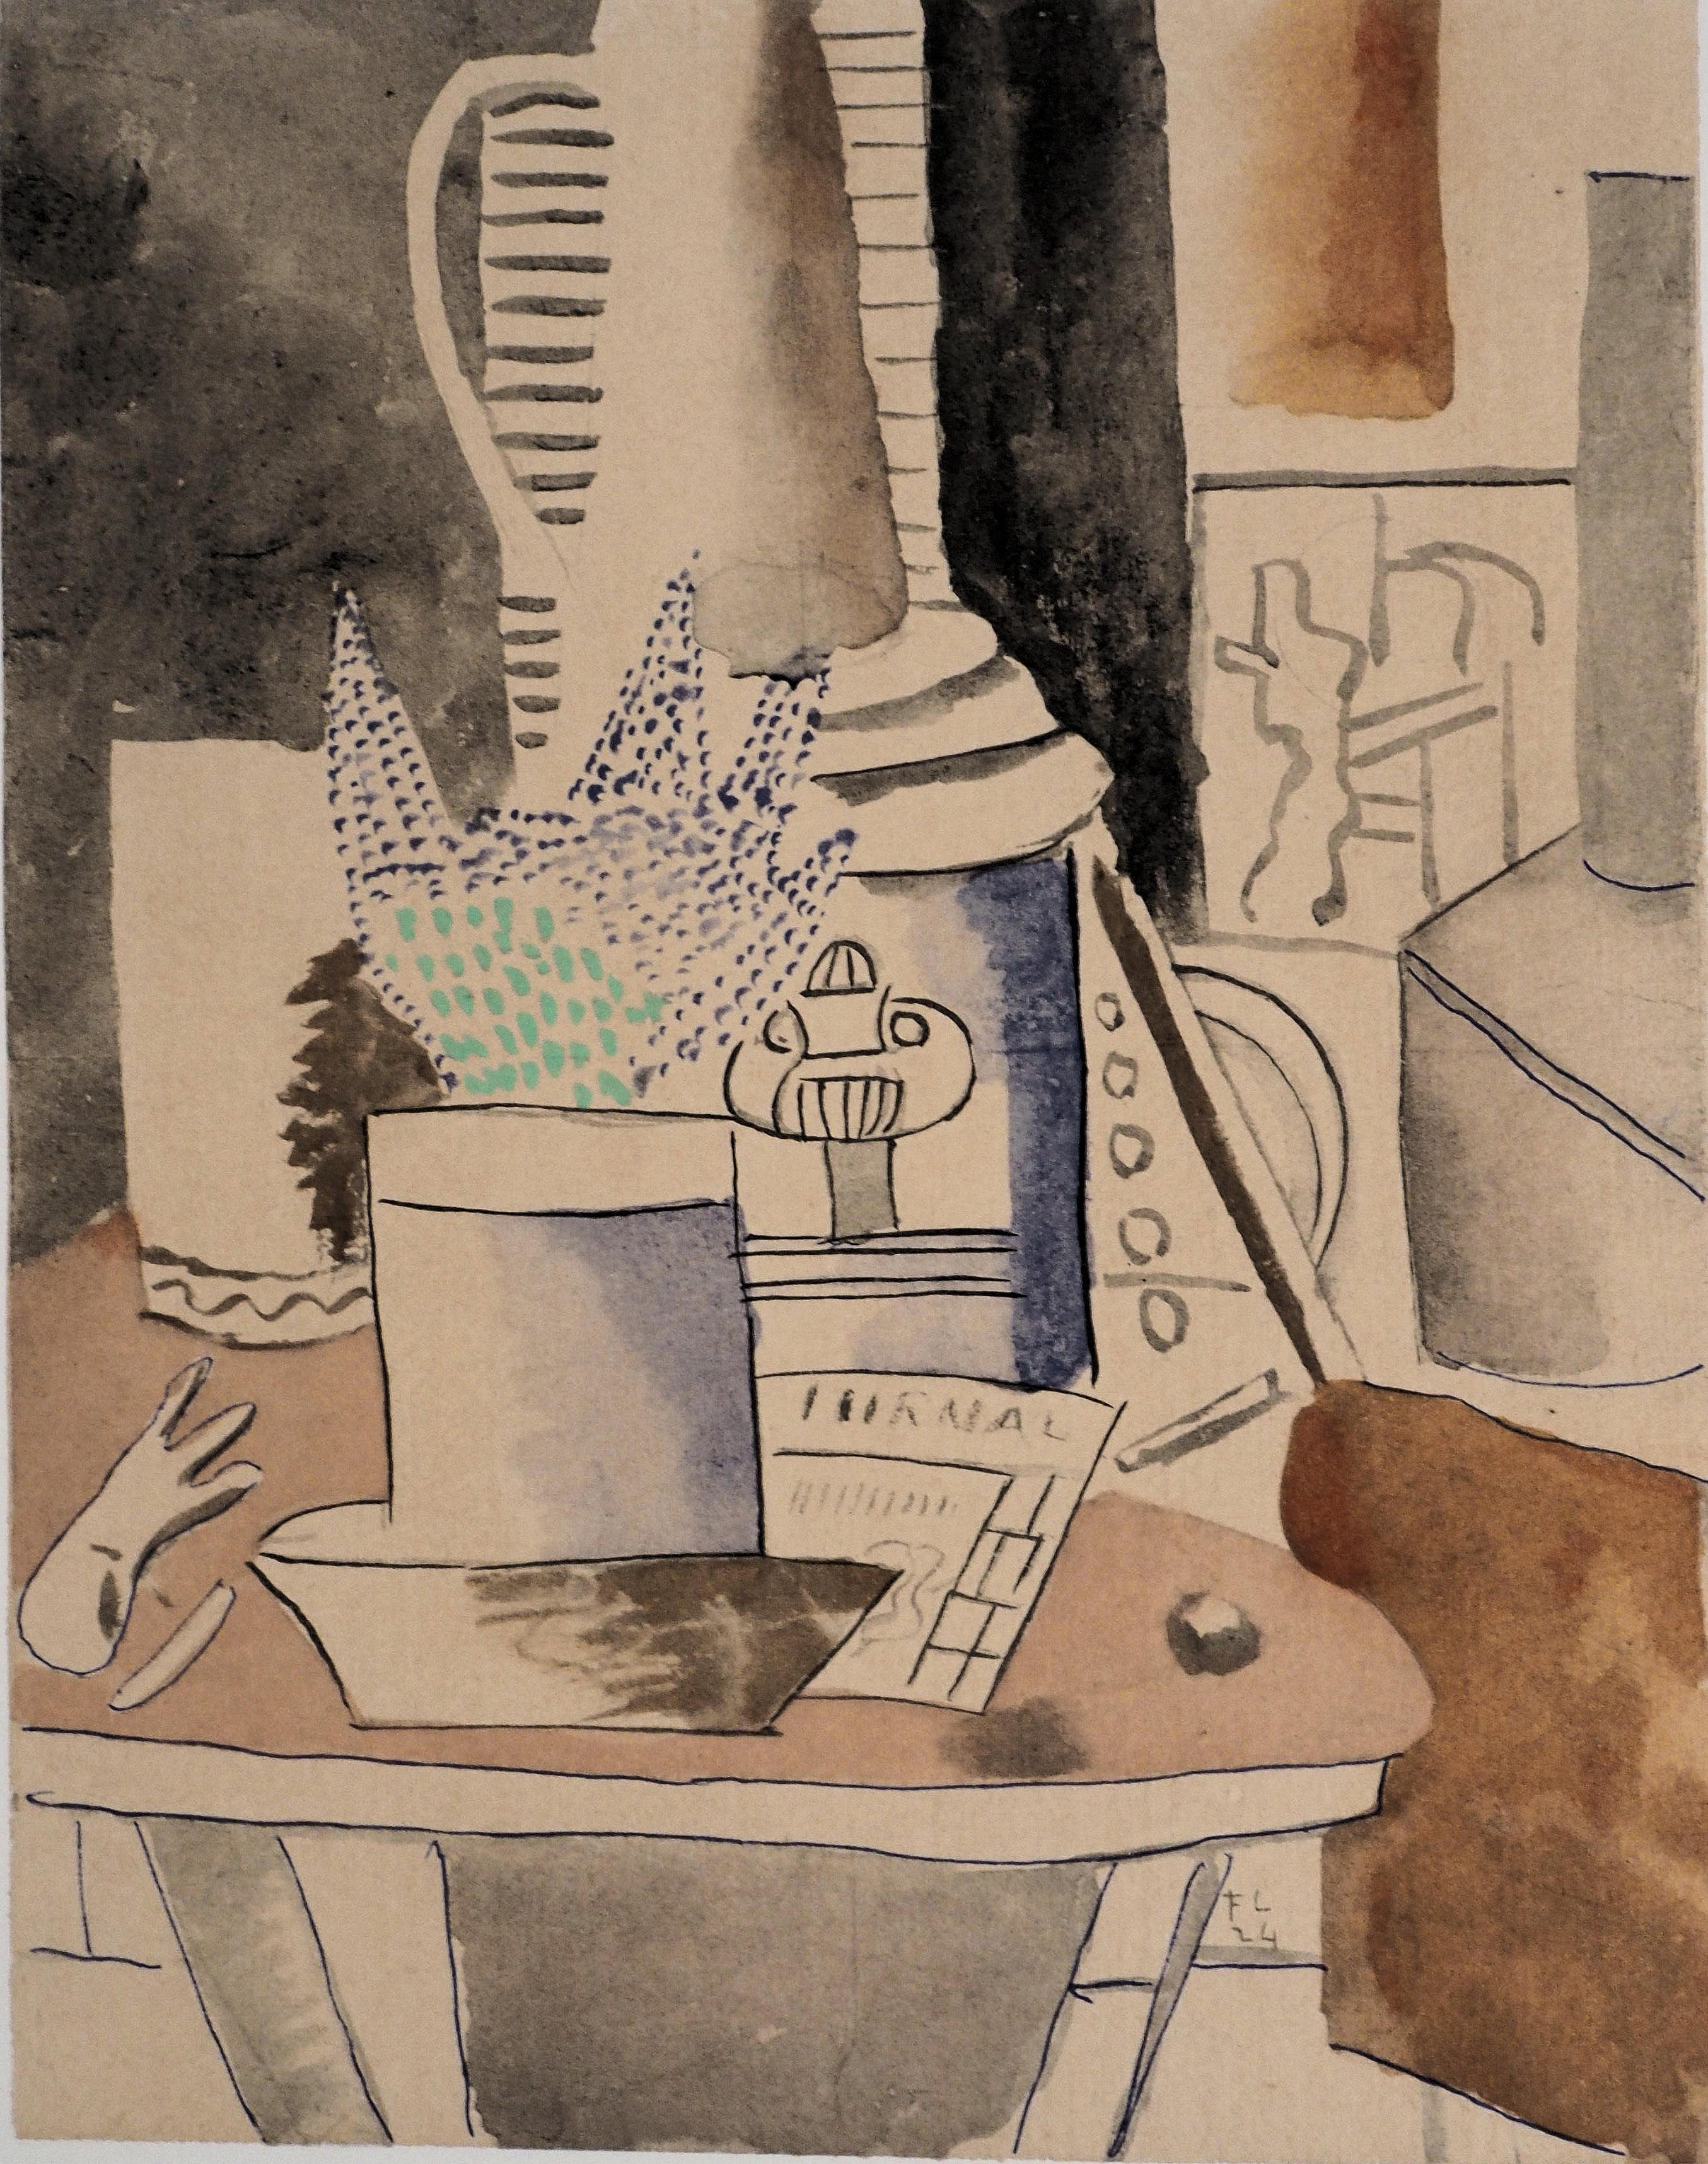 Still life with Journal and Flowers - Lithograph and Stencil, 1959 - Print by Fernand Léger